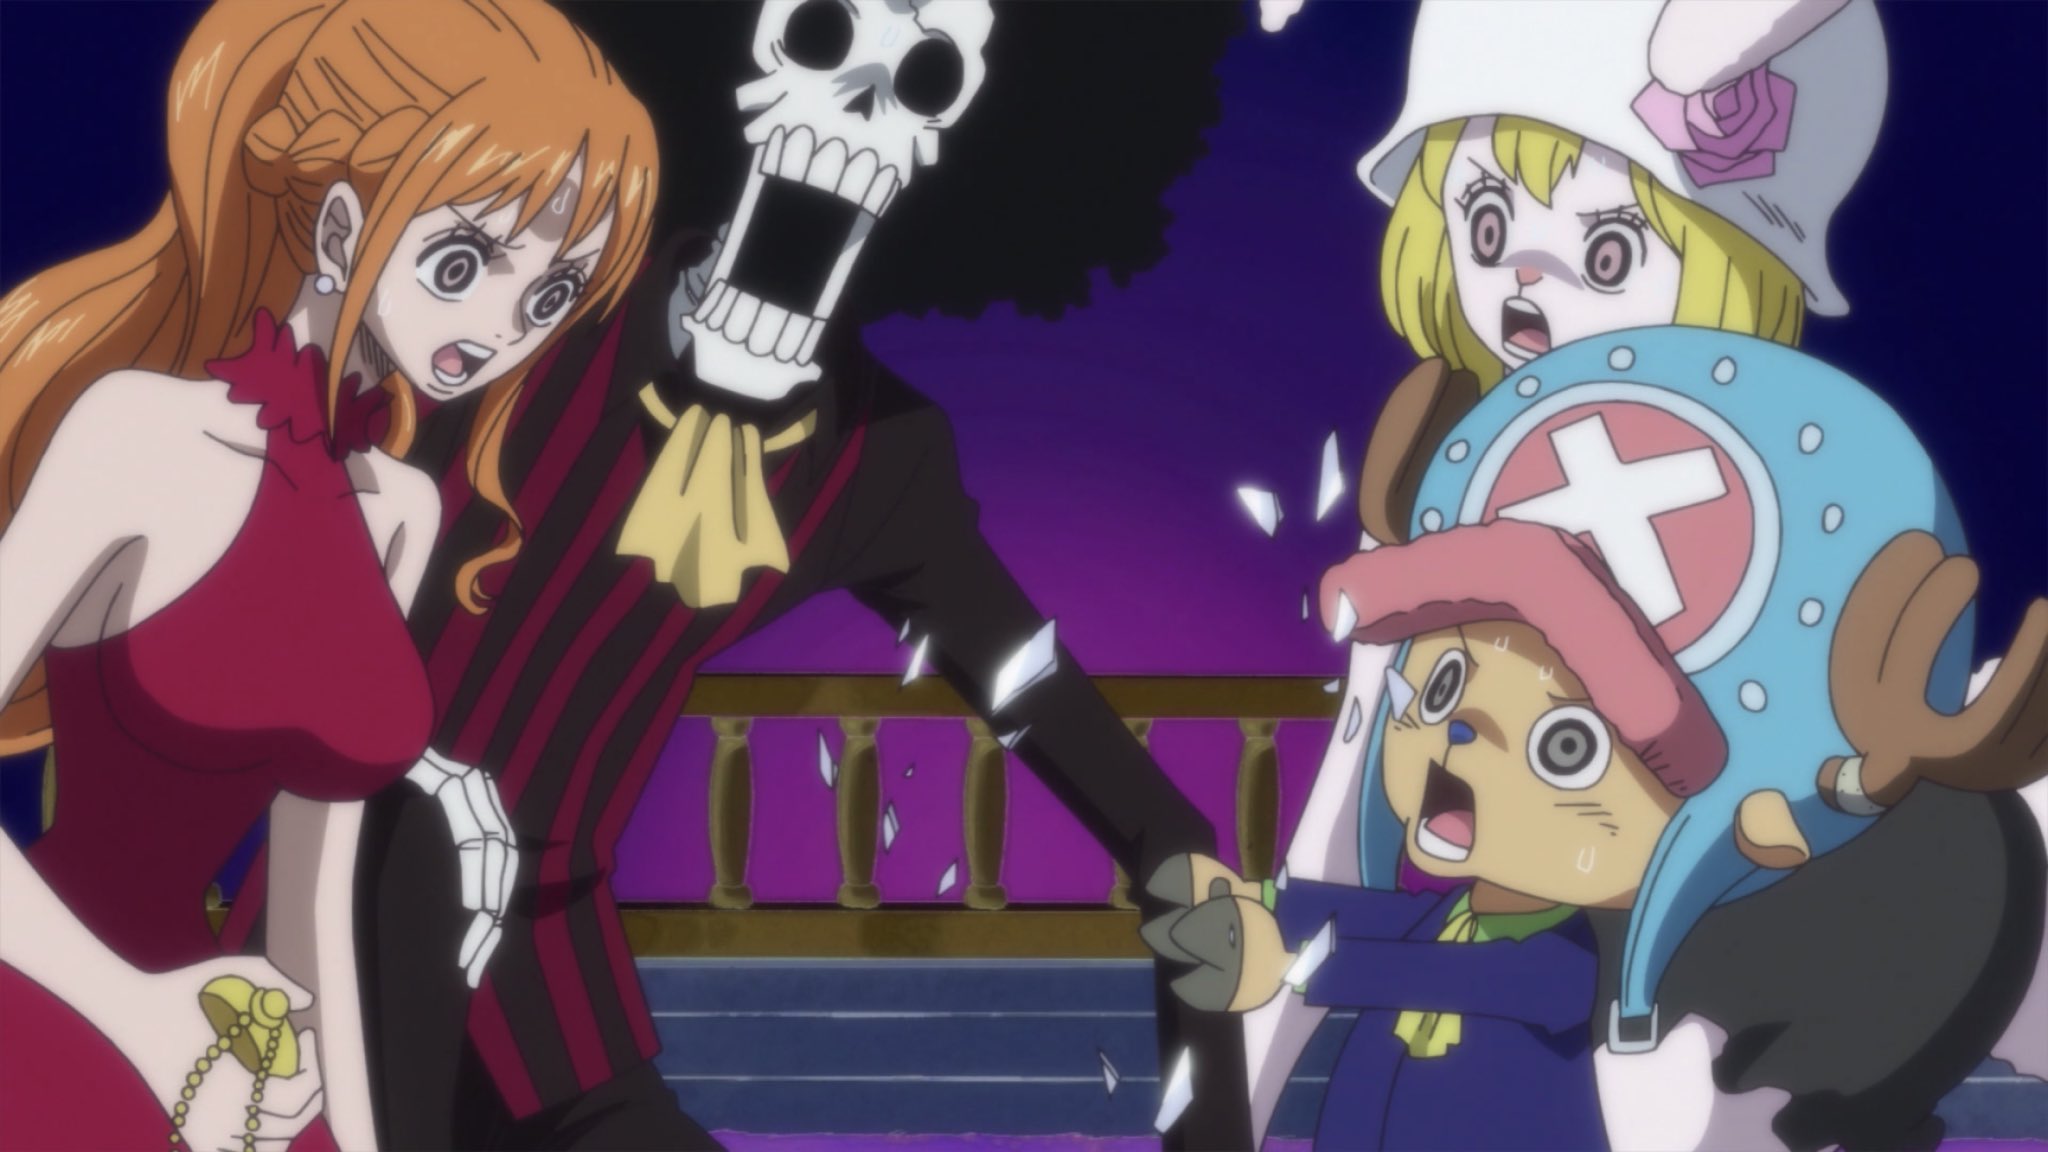 Brothere ワンピース Onepiece Ep 854 Katakuri Unleashes The Slam Jam On Luffy Katakuri Pulls Out The Mole Luffy Will Rendezvous With The Crew On Cacao Island At 1am Big